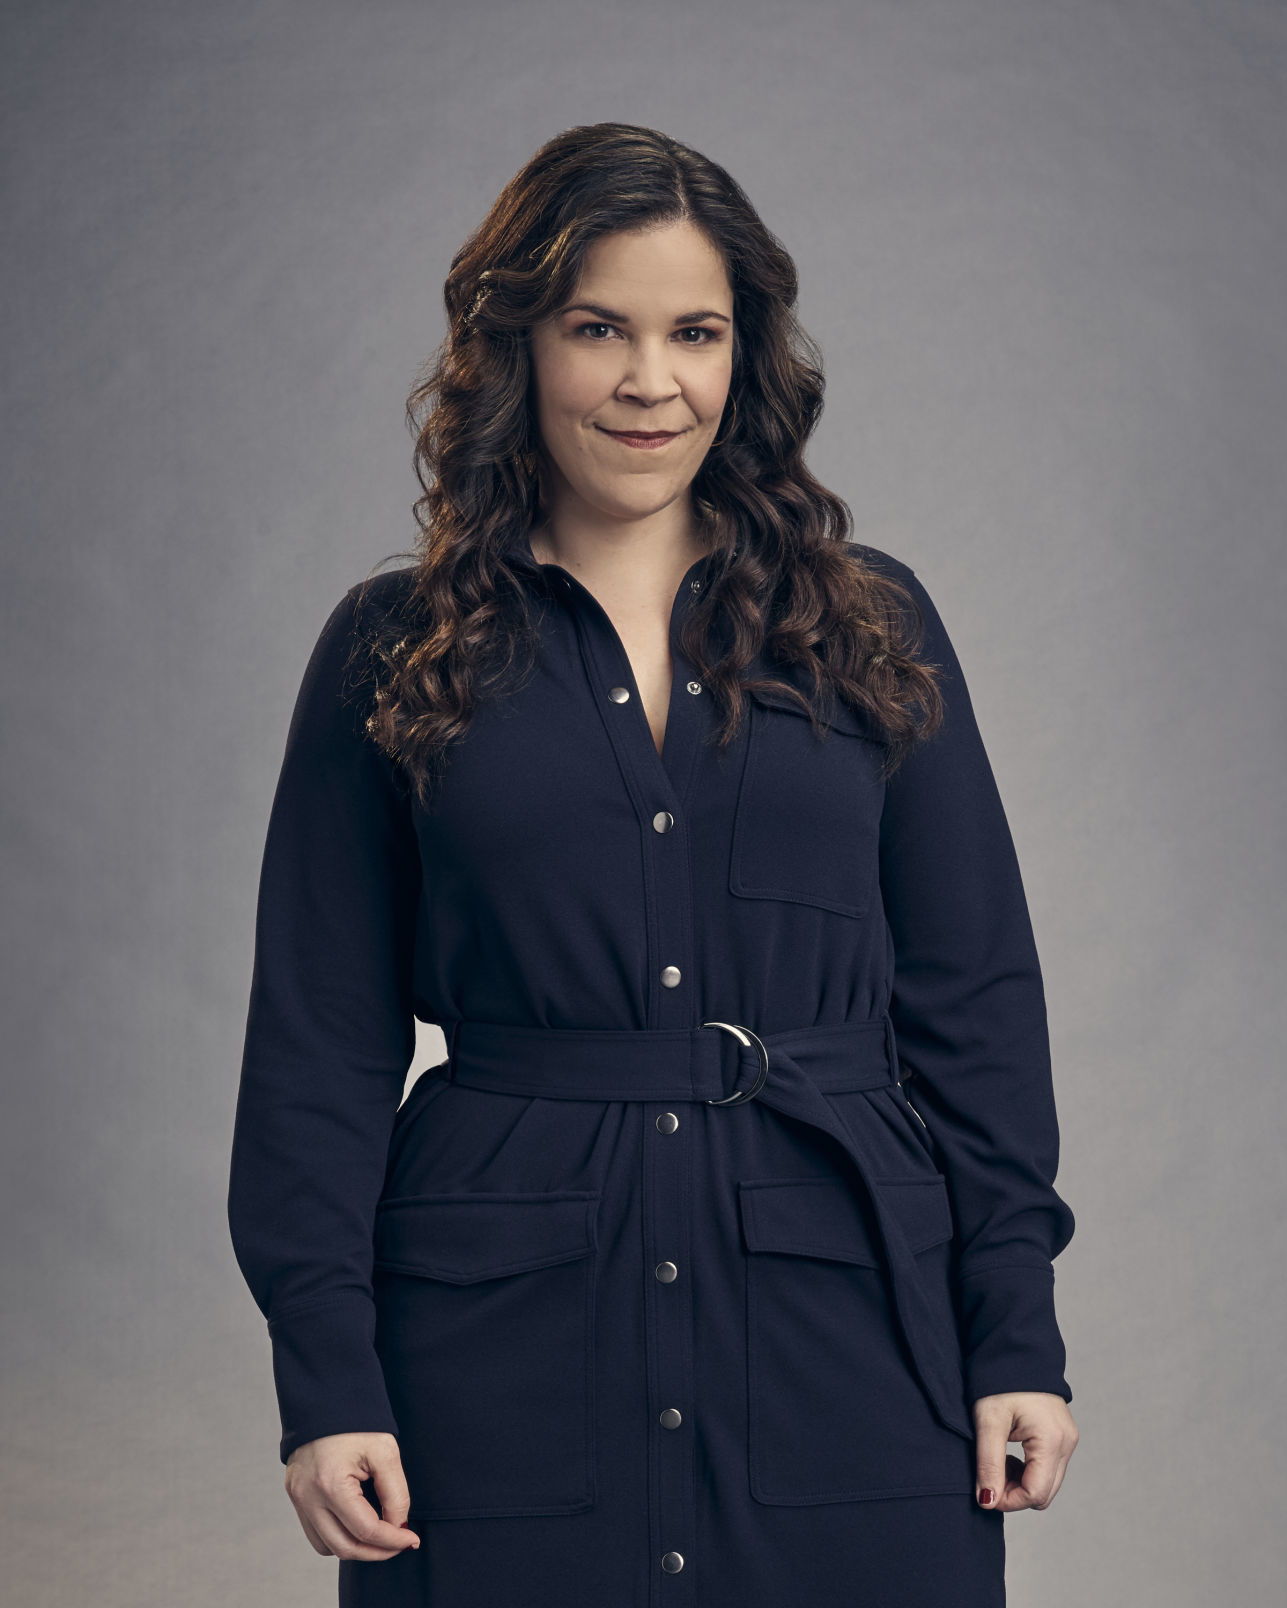 Lindsay Mendez, Ruthie Ann Miles find new challenges with 'All Rise'